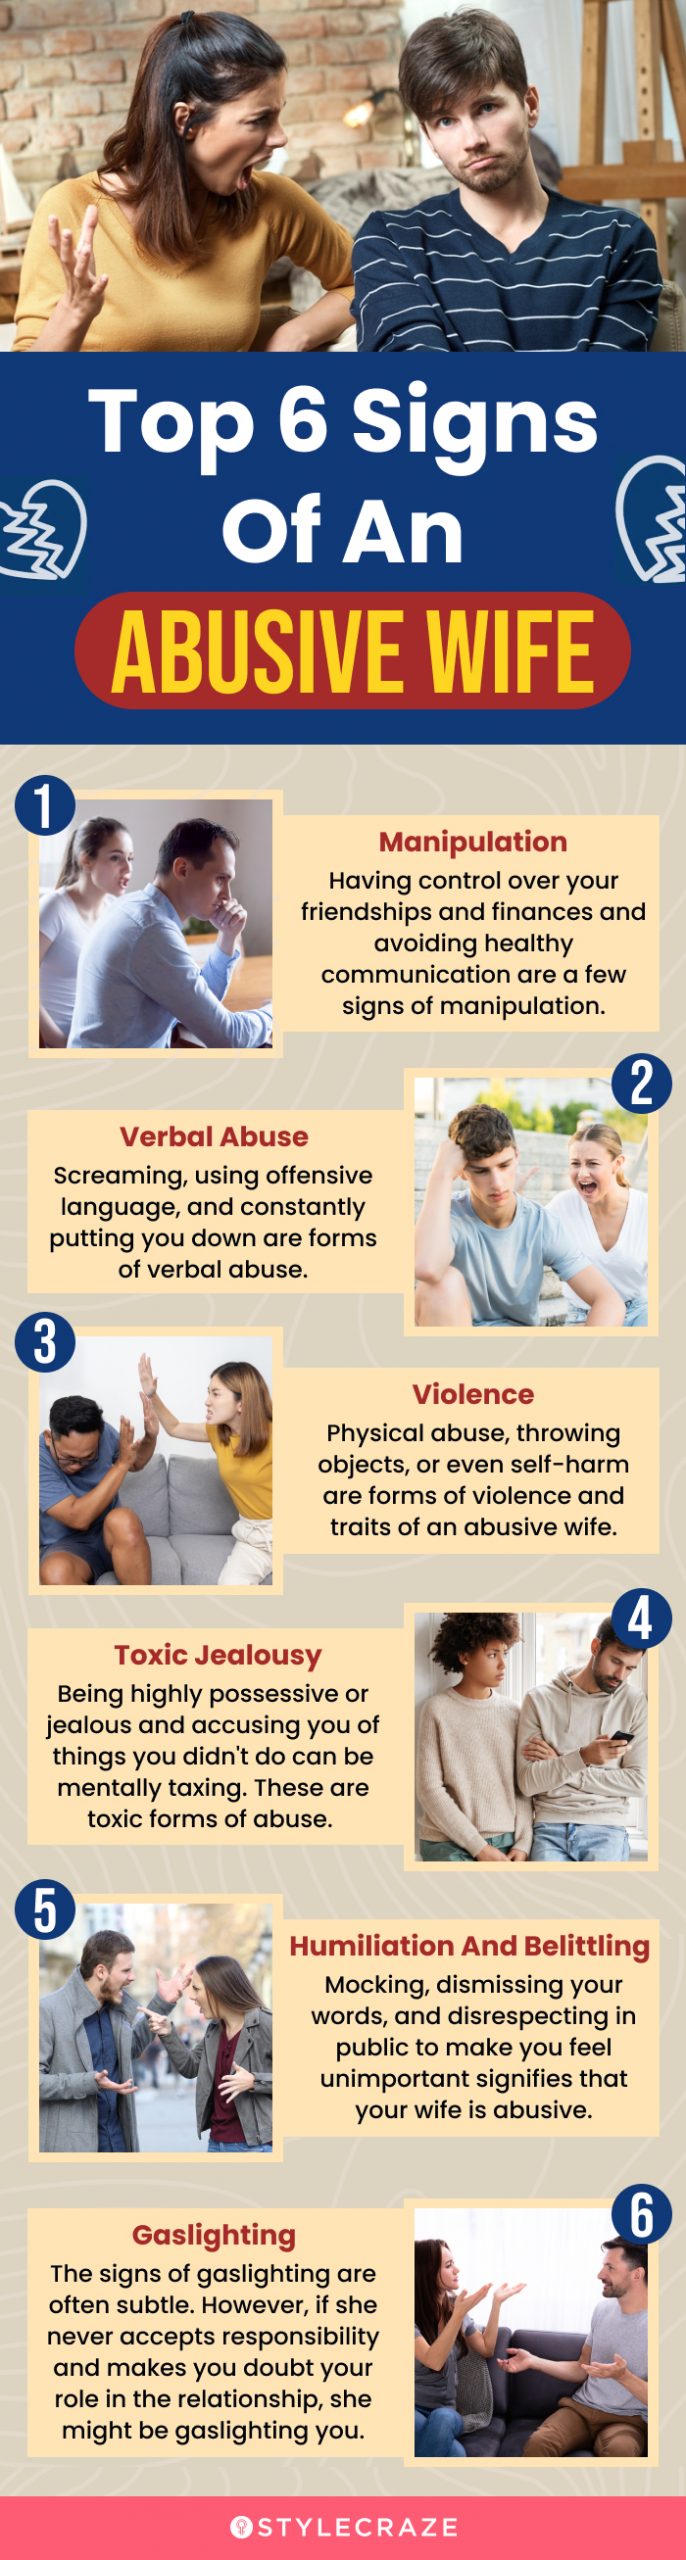 top 6 signs of an abusive wife (infographic)